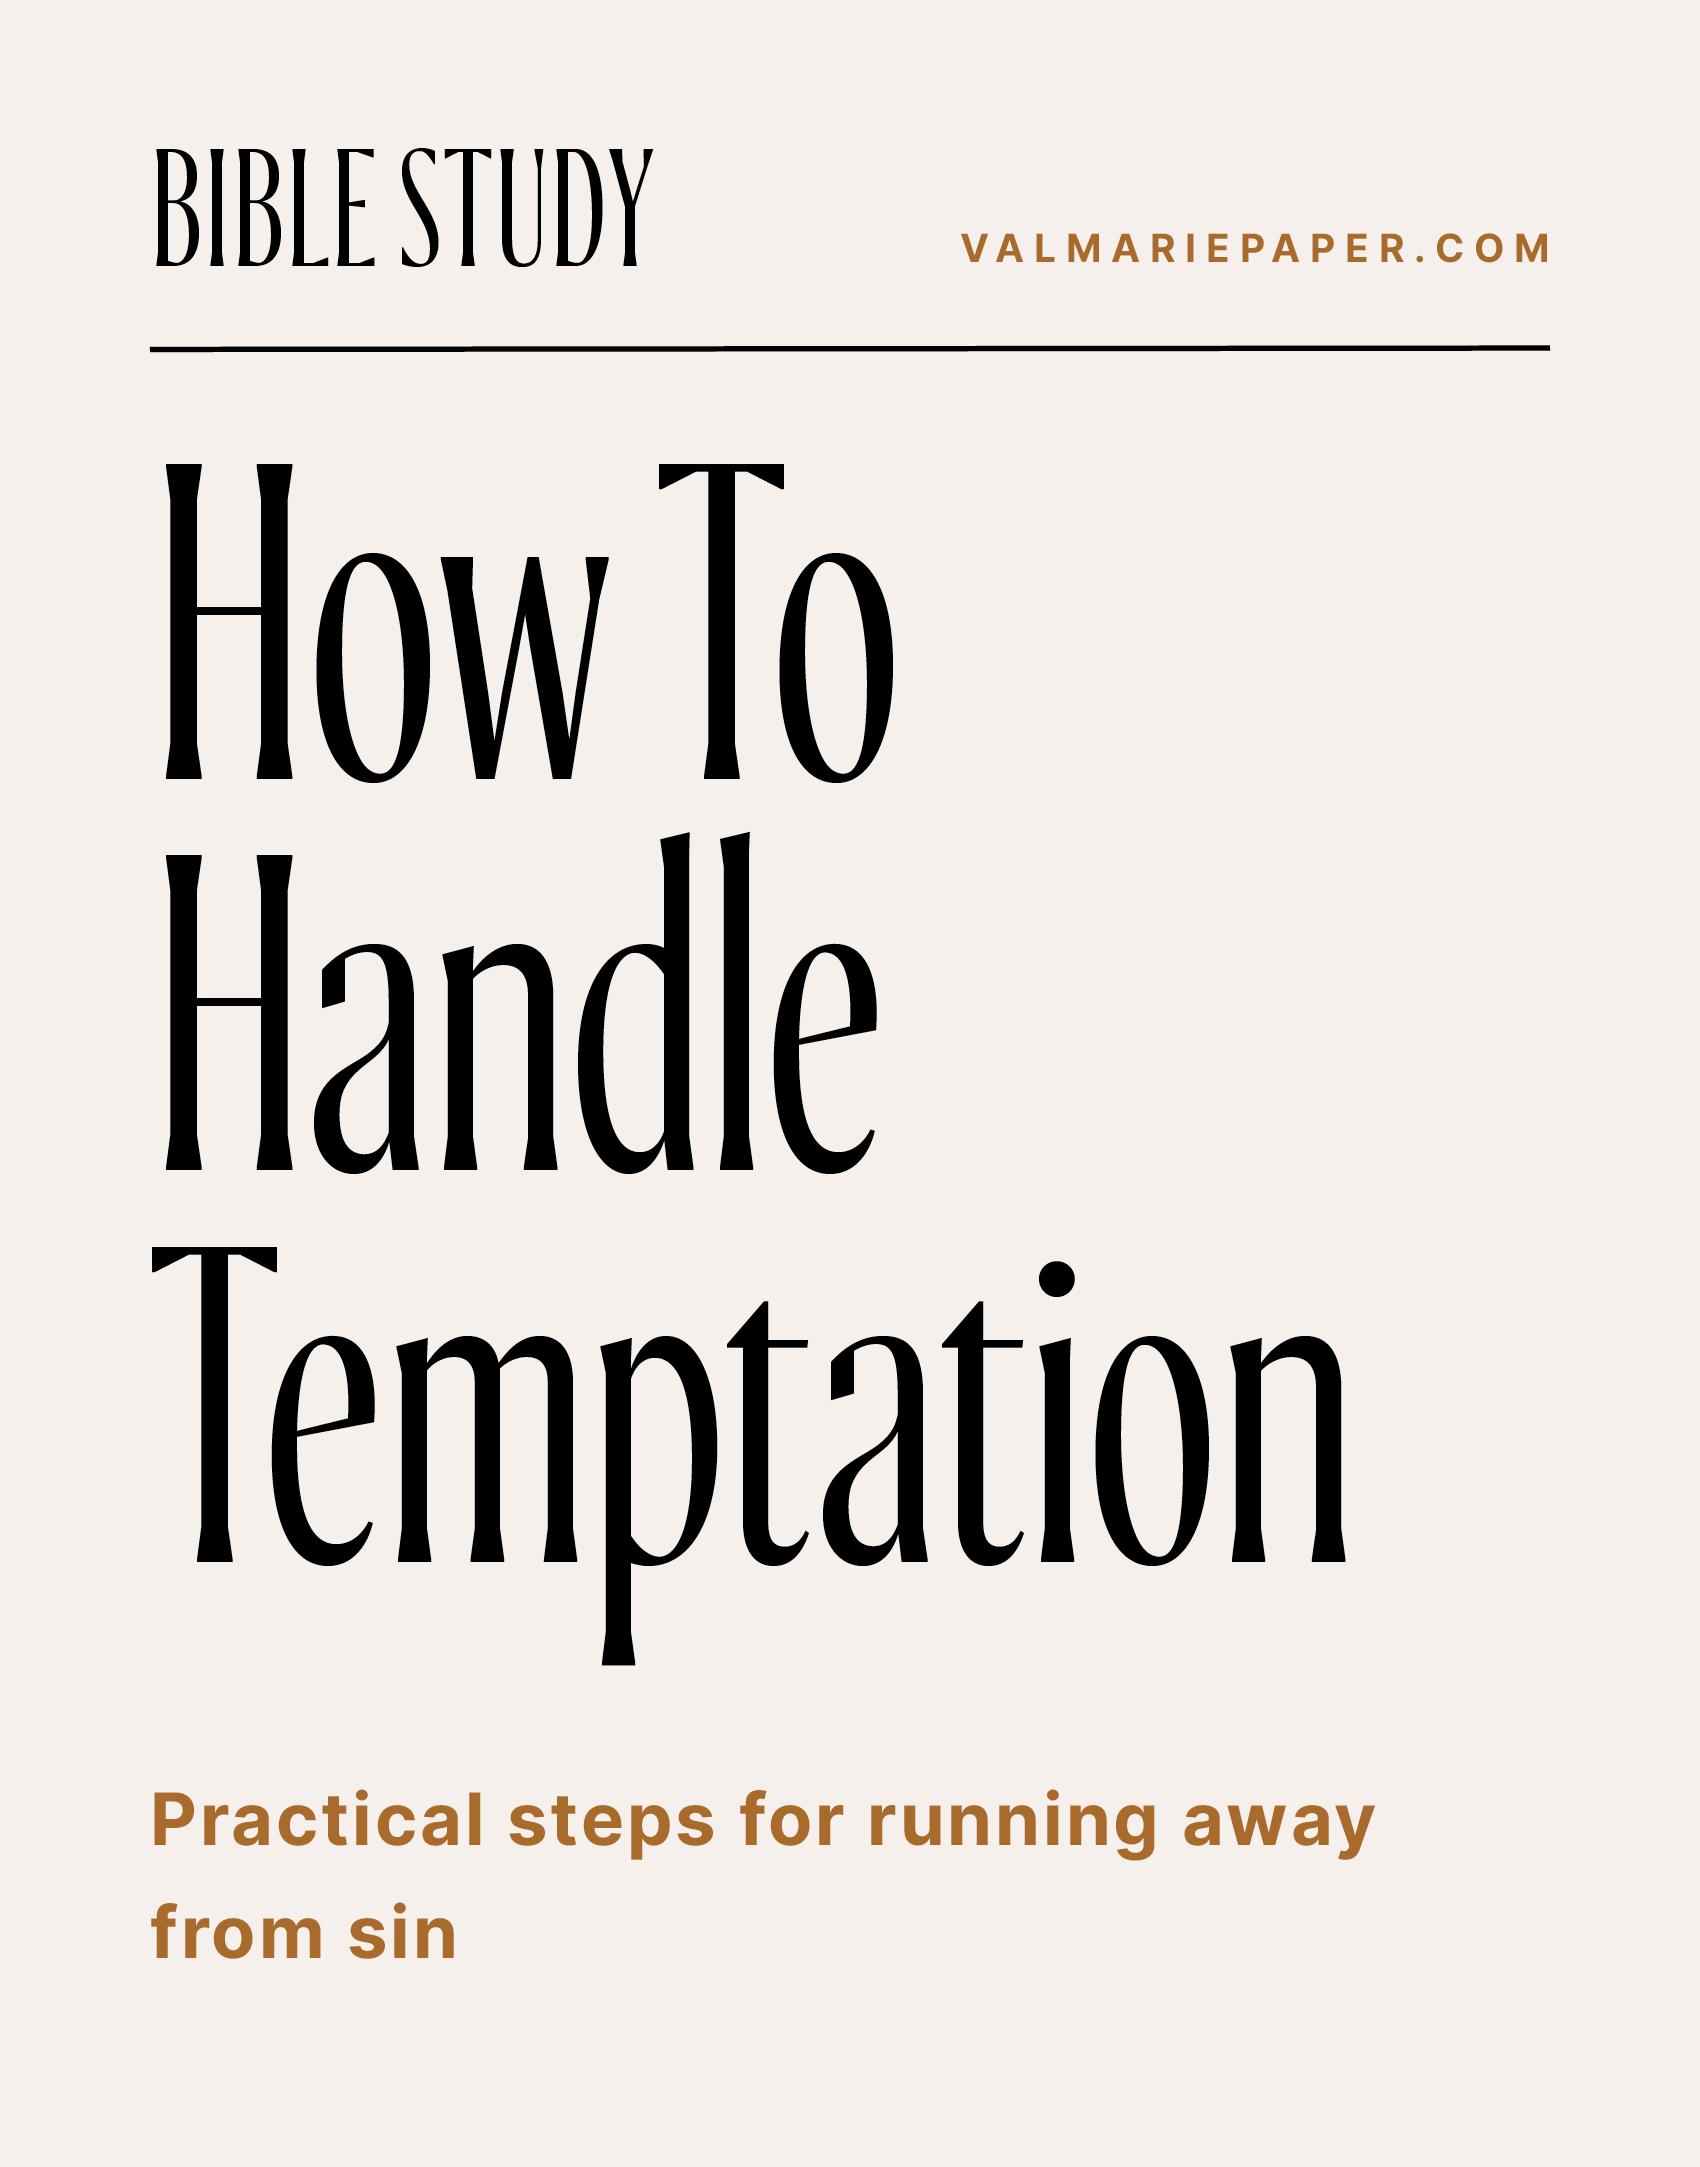 How to handle temptation by Valerie Woerner, prayer journal, women's ministry, prayer, meditation, how to make a prayer journal, prayer warrior, war room, Bible study, tools, prayer notebook, how to pray, distance, distant from god, temptation